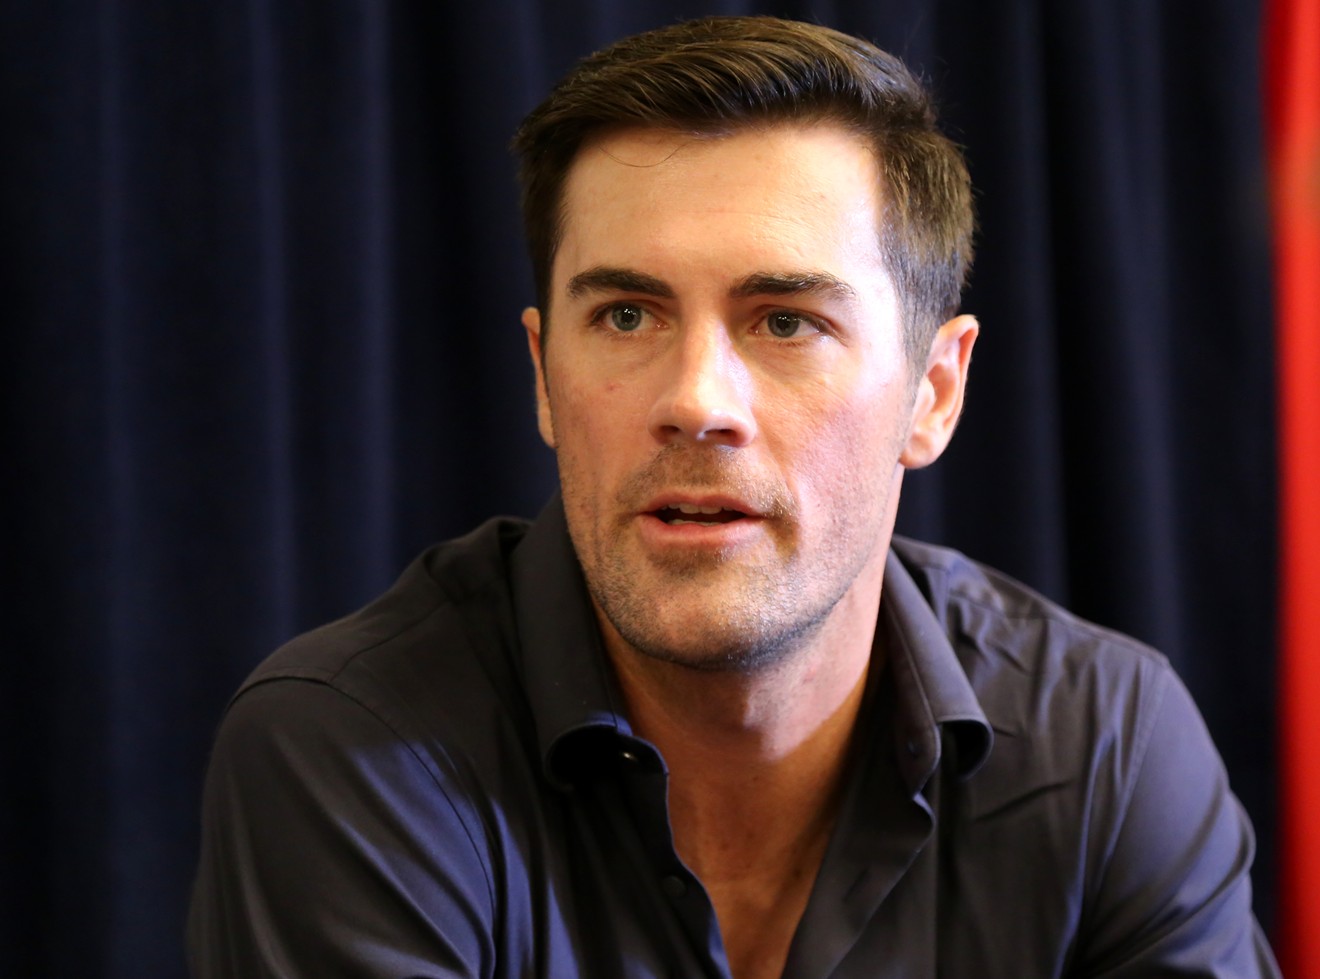 Cole Hamels spoke with reporters before the 2016 All-Star game.